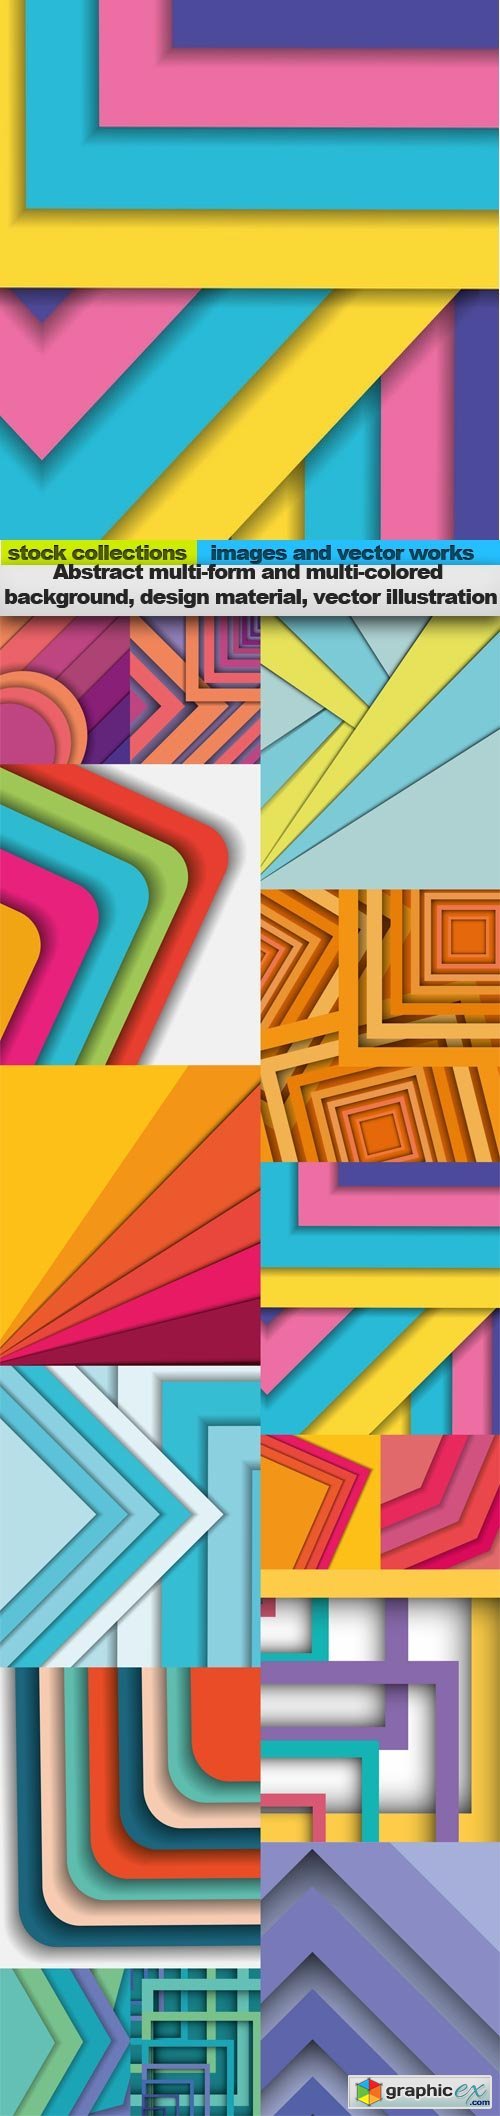 Abstract multi-form and multi-colored background, design material, vector illustration, 15 x EPS